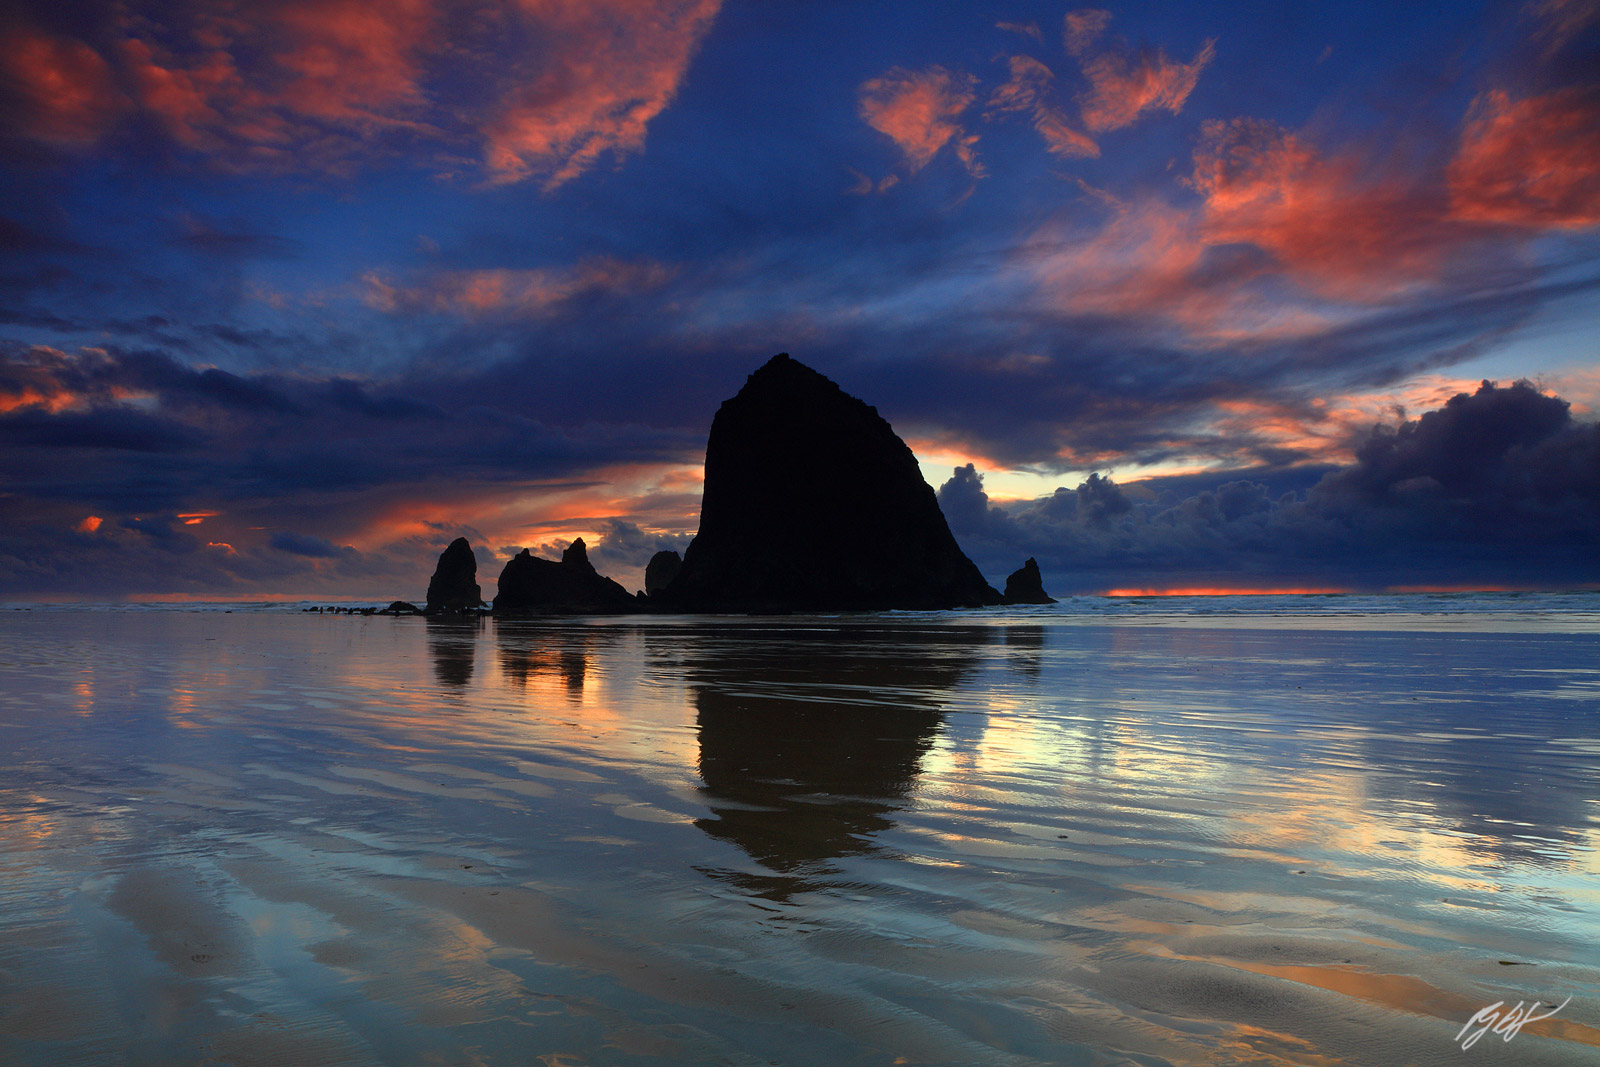 Sunset Haystack Rock and the Needles for Cannon beach in Oregon